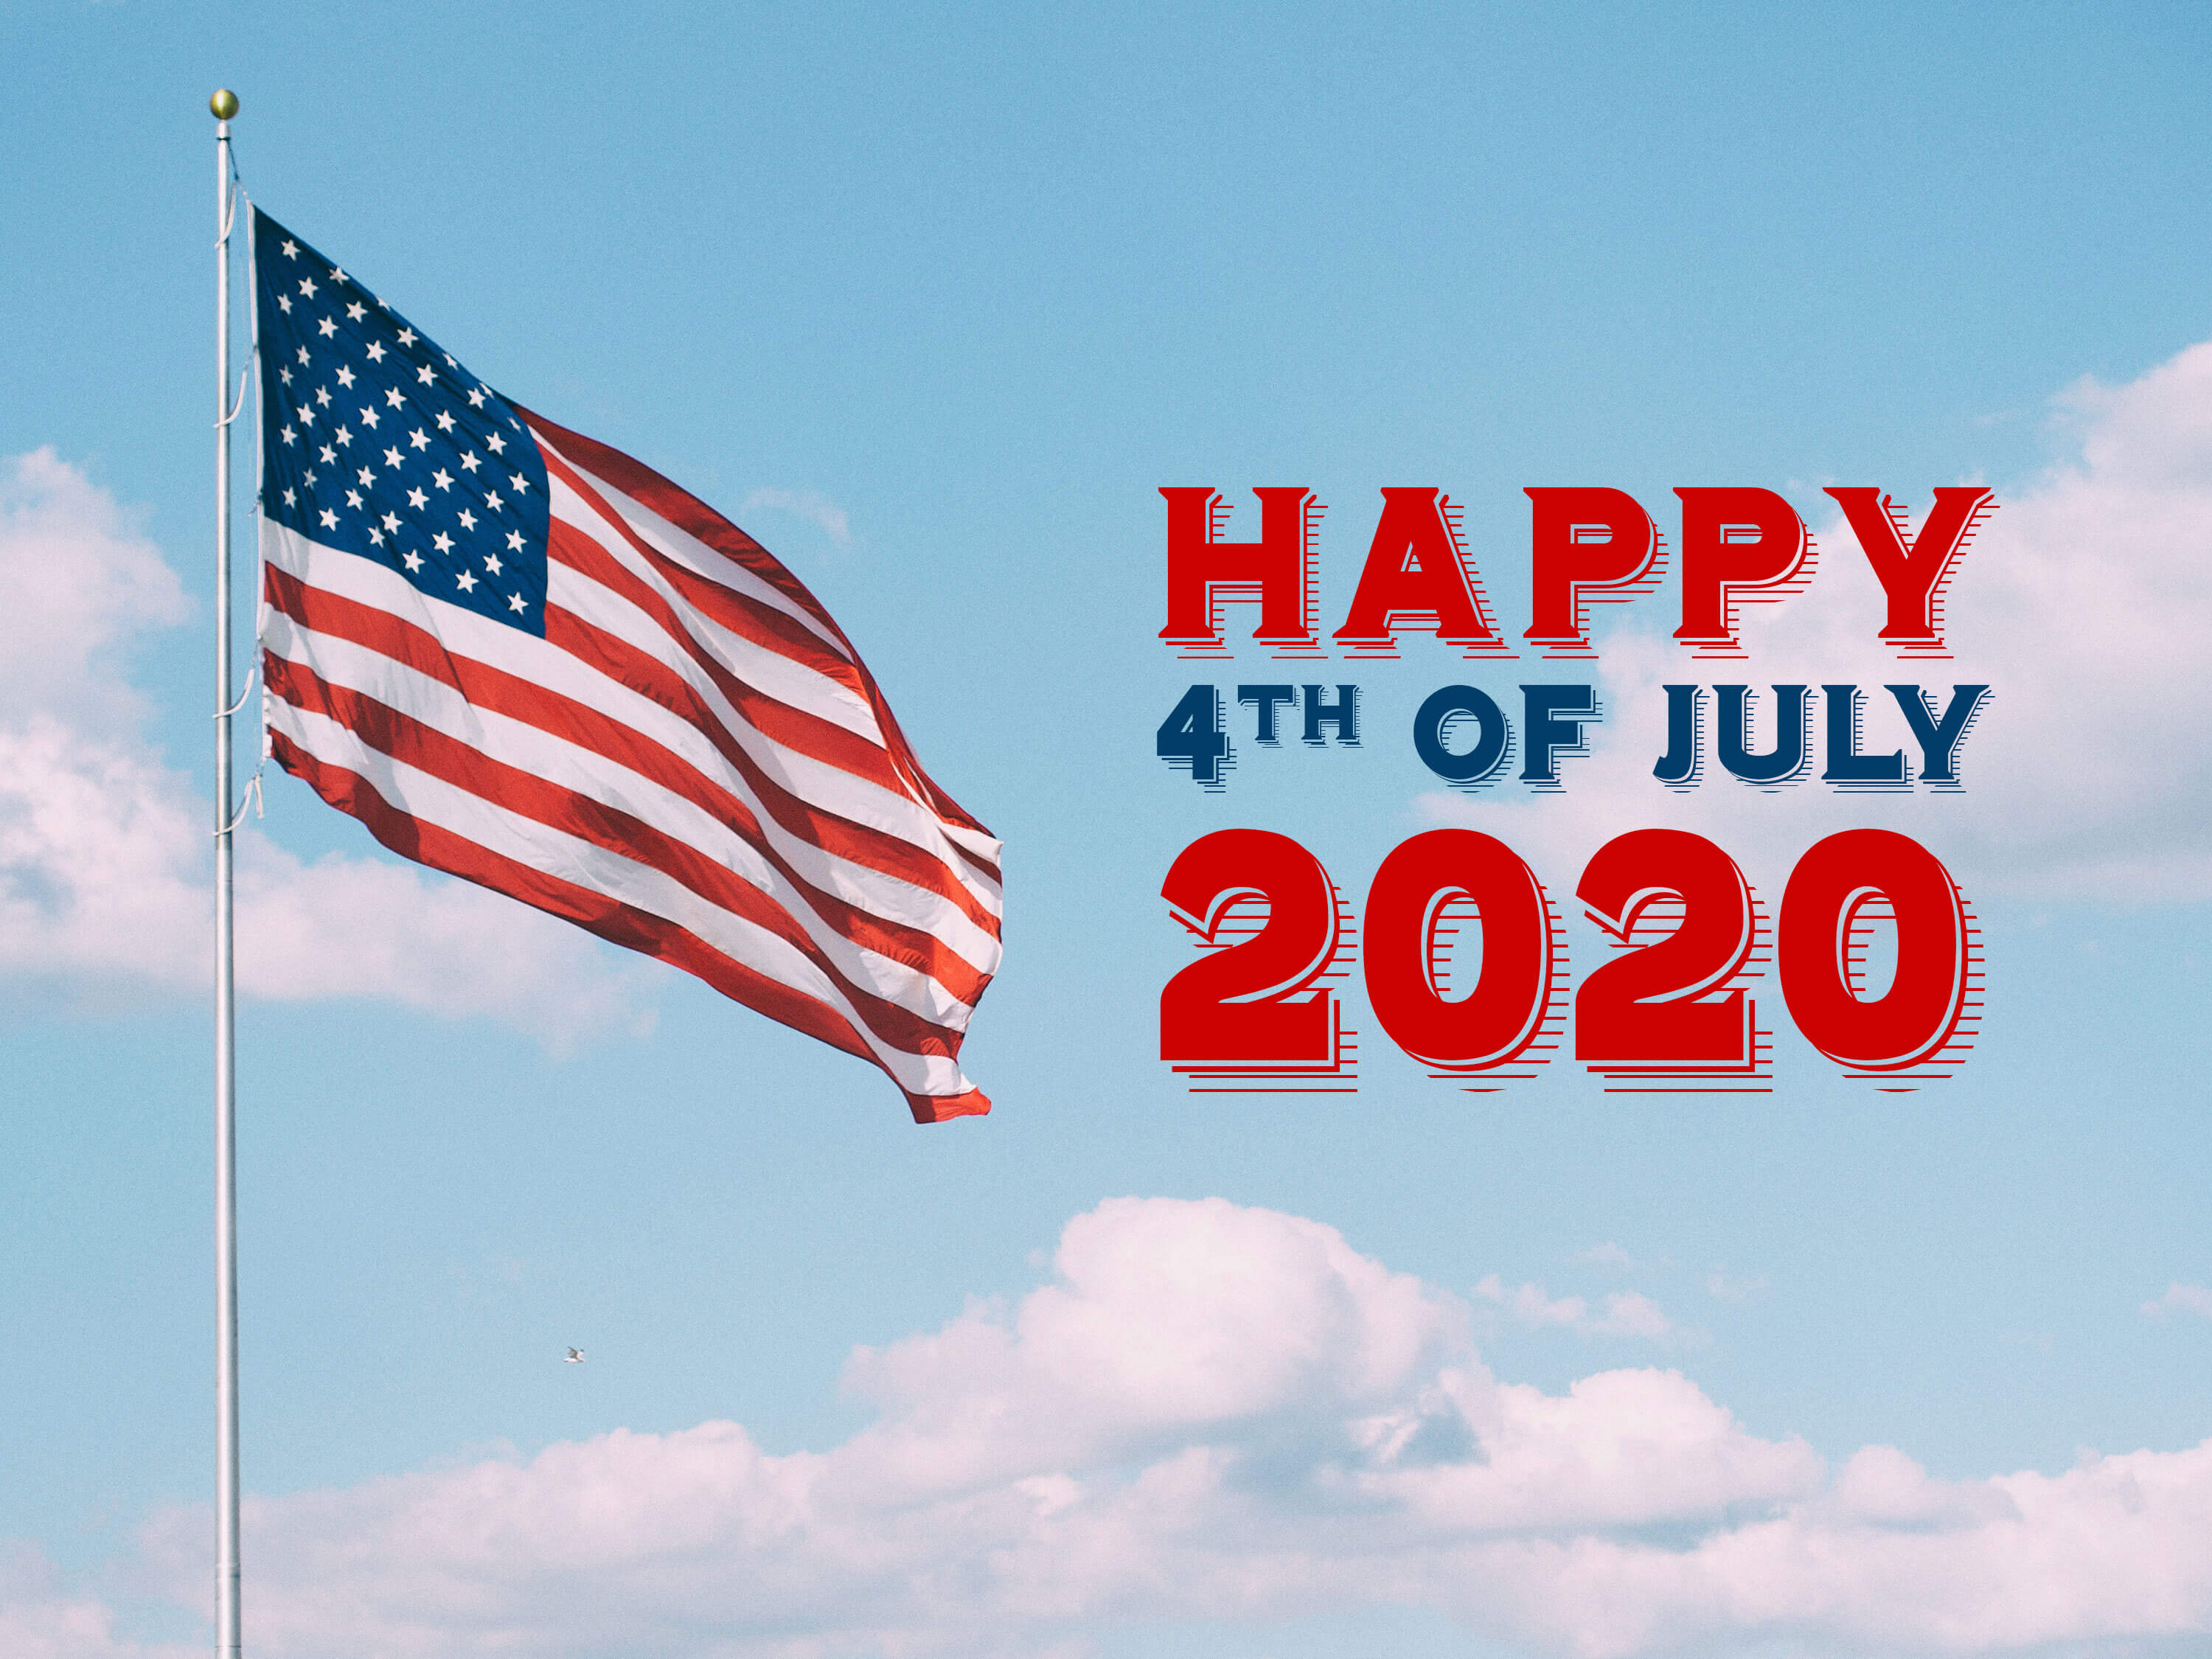 Happy 4th of July Independence Day USA 2020 Image